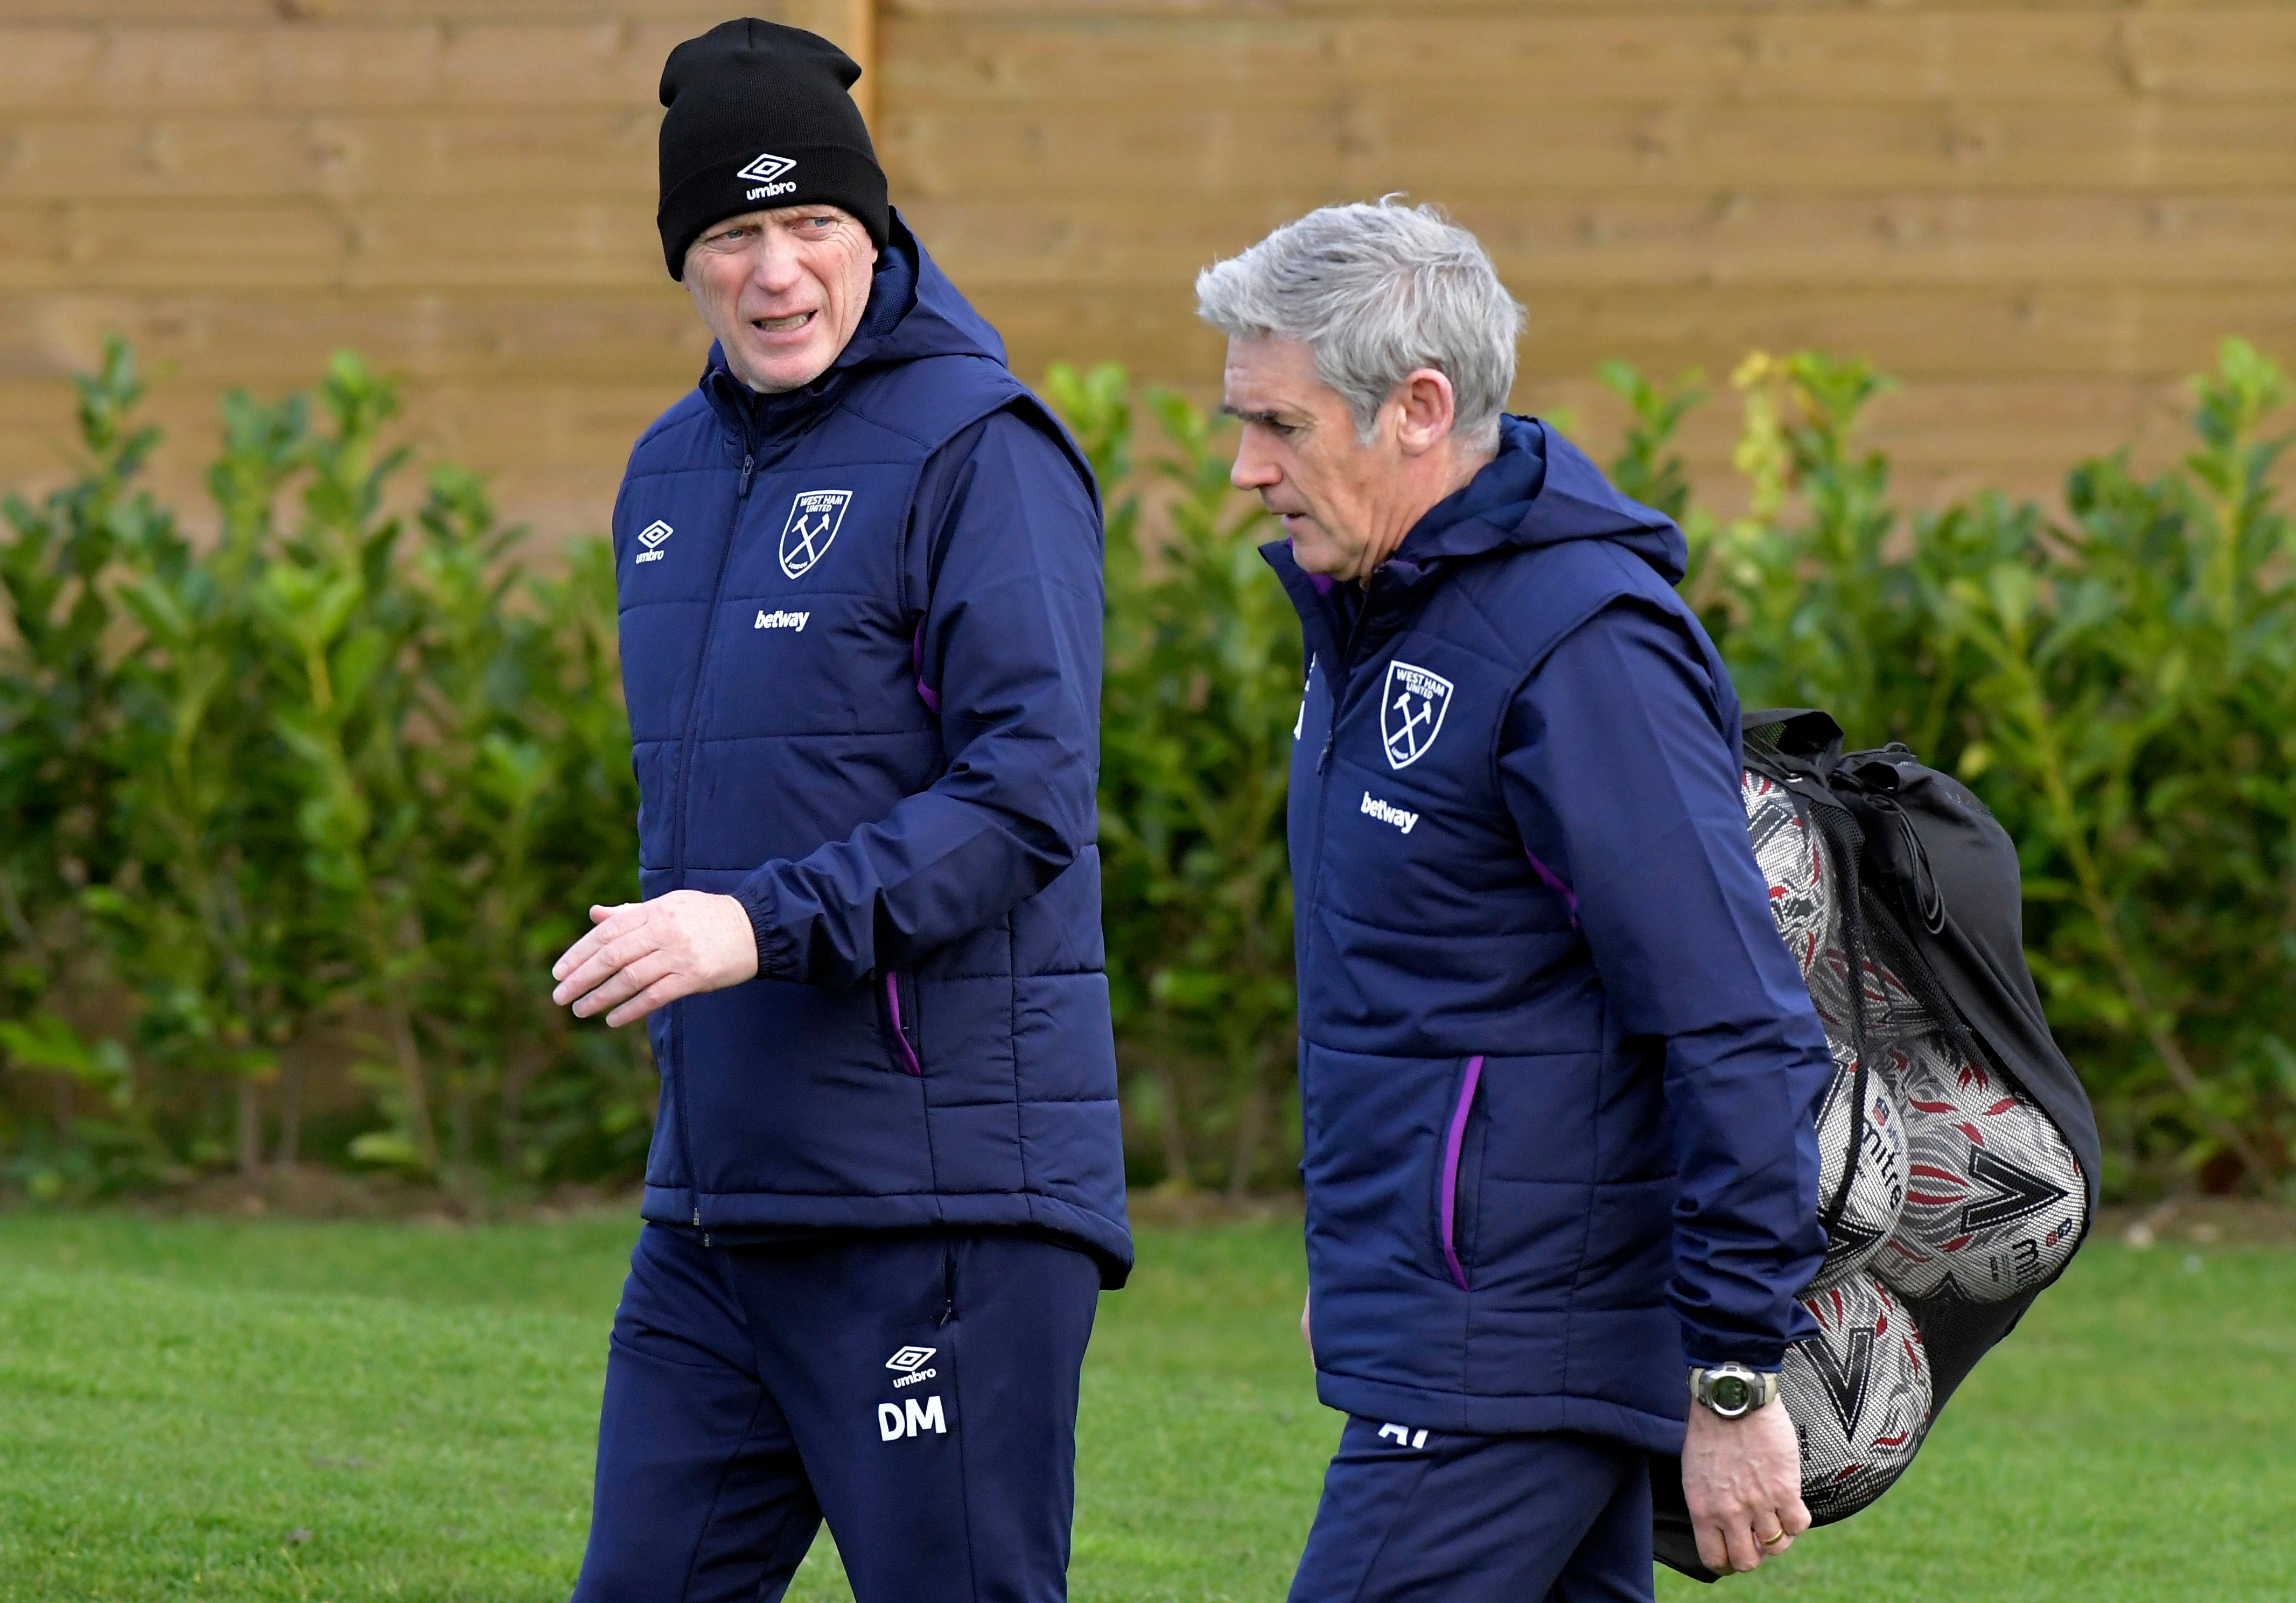 West Ham manager David Moyes (left) with assistant coach Alan Irvine